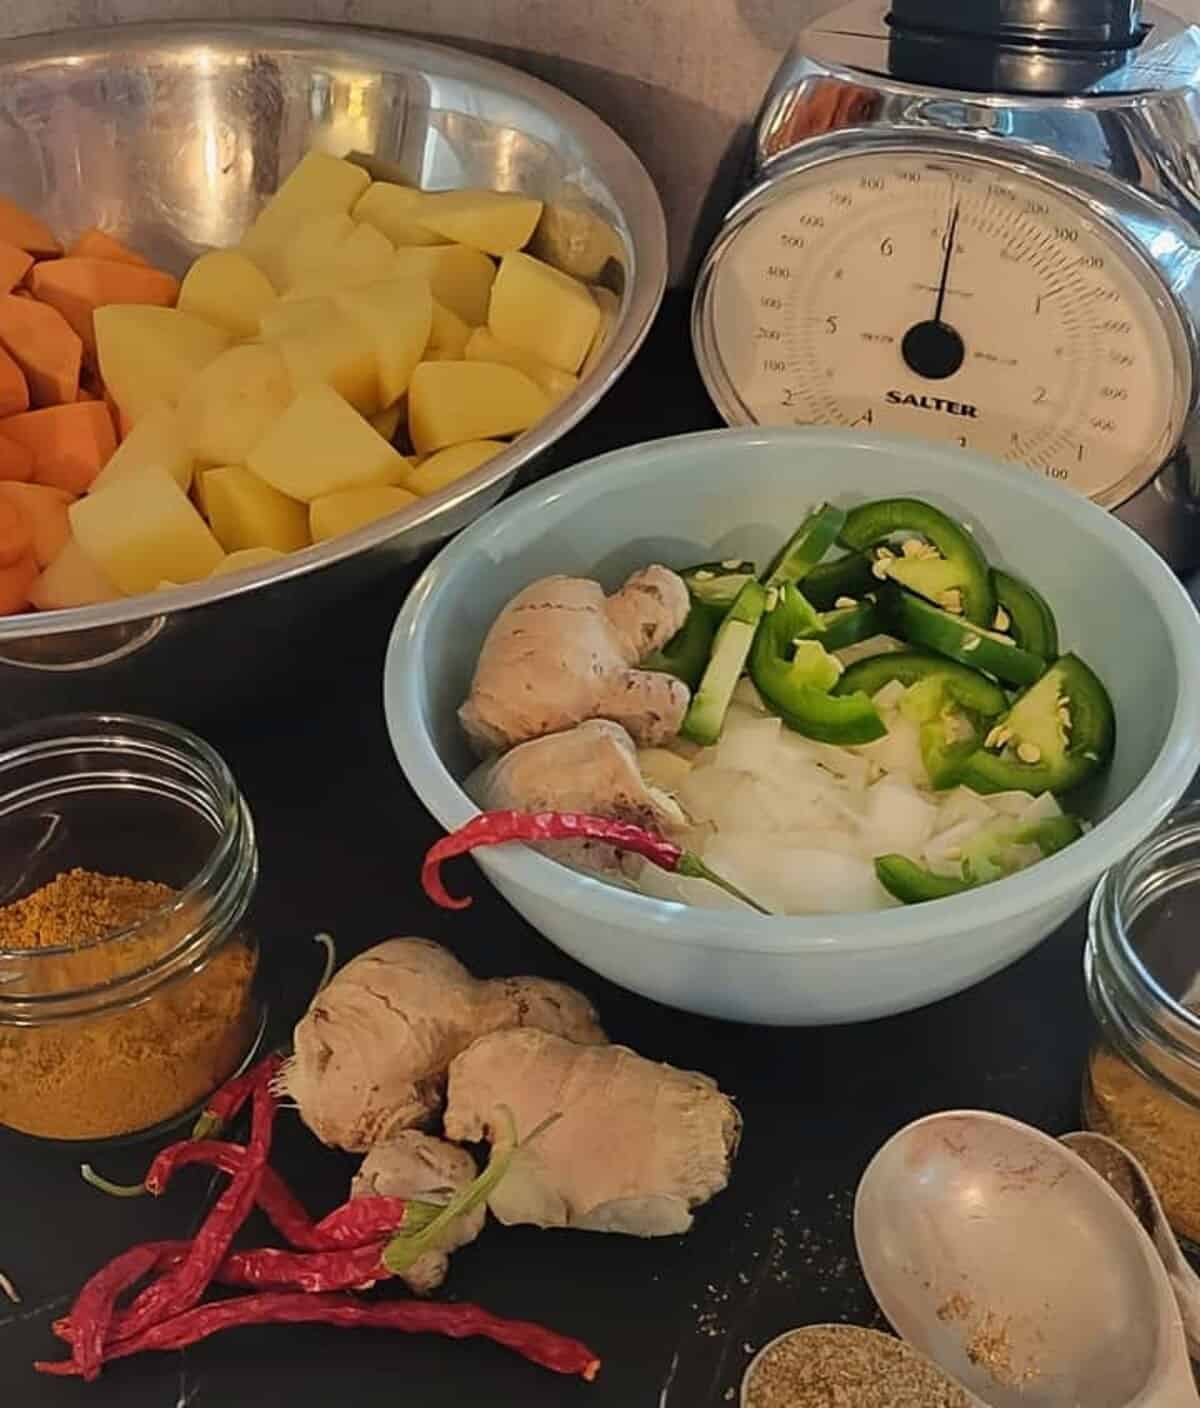 curry ingredients: chopped potato, sweet potato, whole ginger, sliced jalapeno, diced onion, curry powder, dried red chilies, coriander and cumin